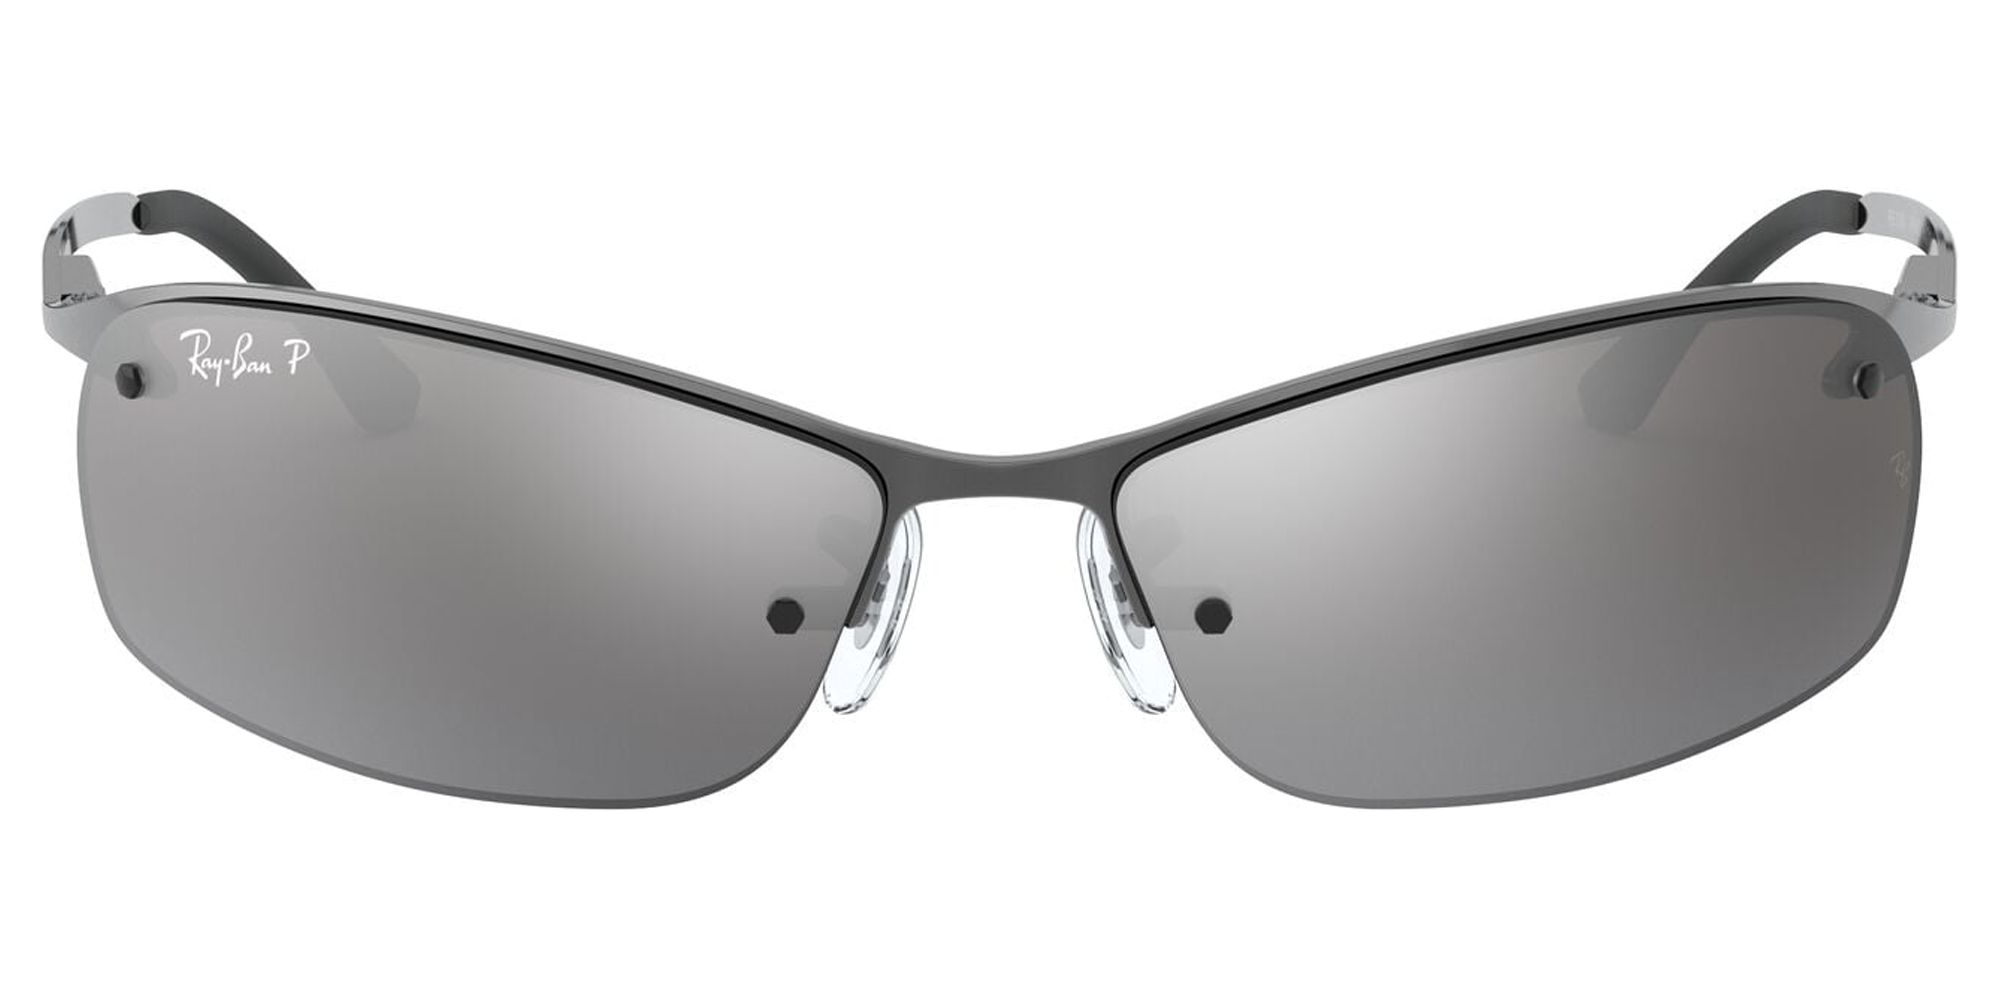 Ray-Ban RB3183 Adult Sunglasses - image 1 of 12